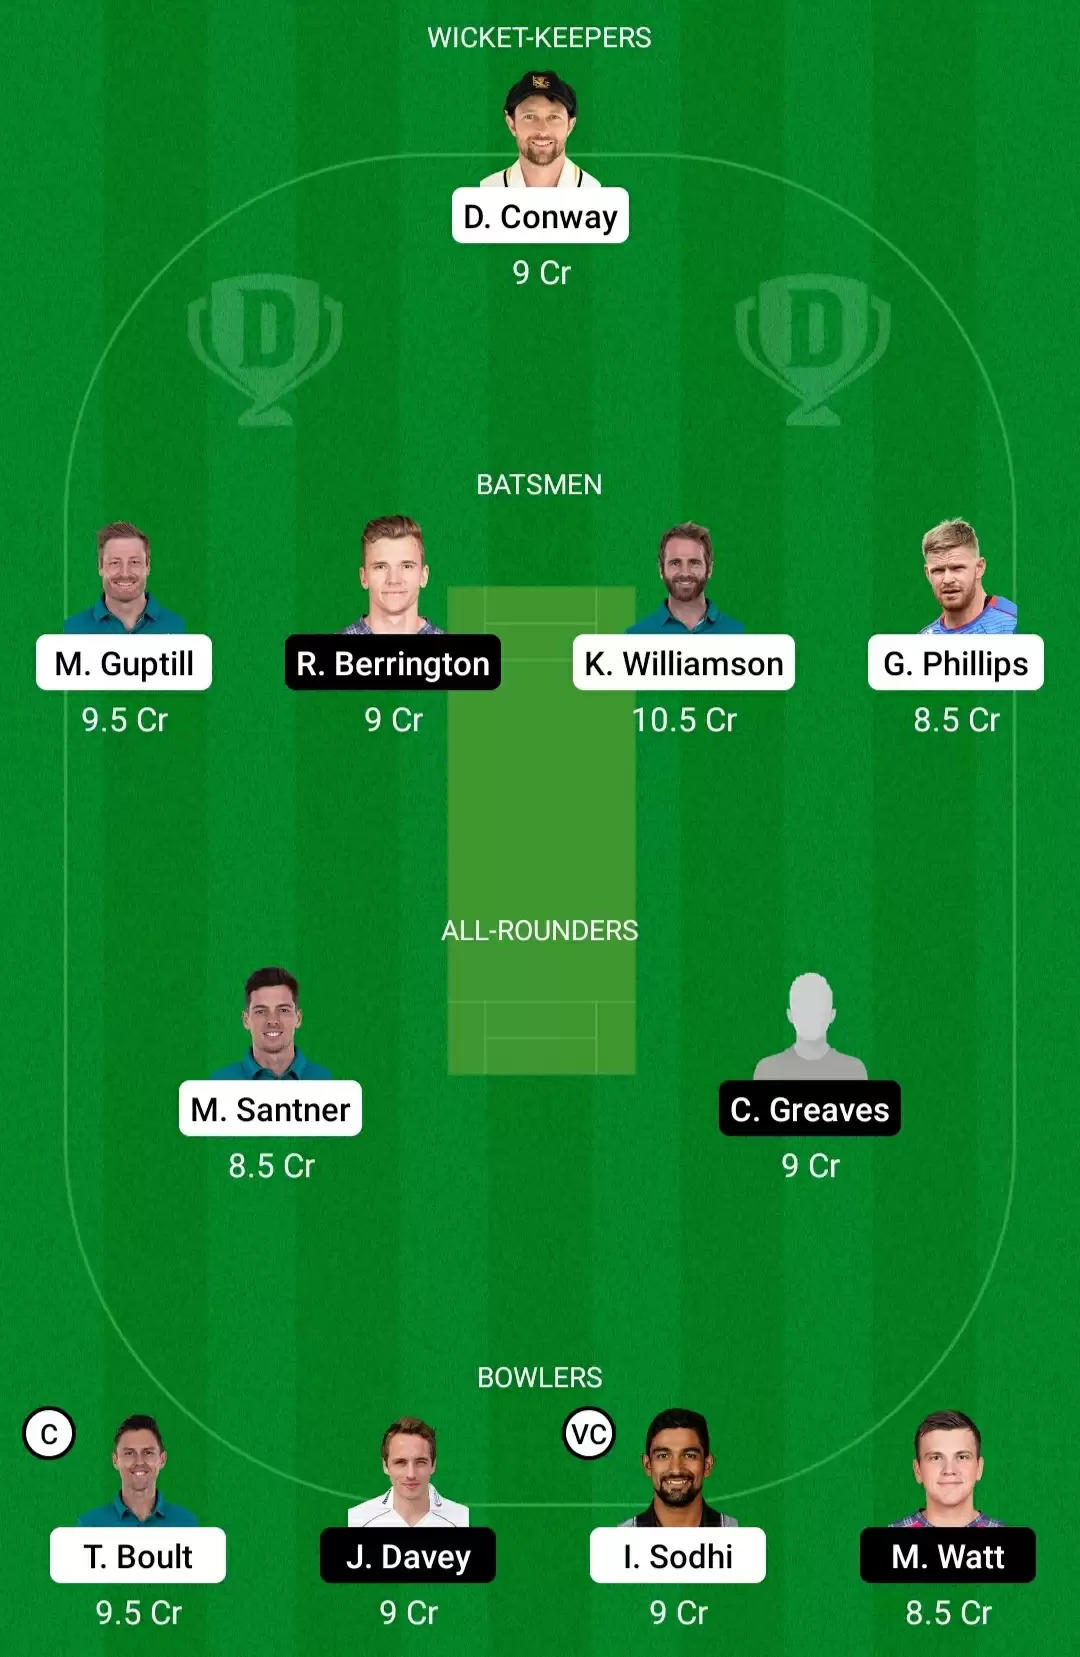 NZ vs SCO Dream11 Prediction for T20 World Cup 2021: Playing XI, Fantasy Cricket Tips, Team, Weather Updates and Pitch Report